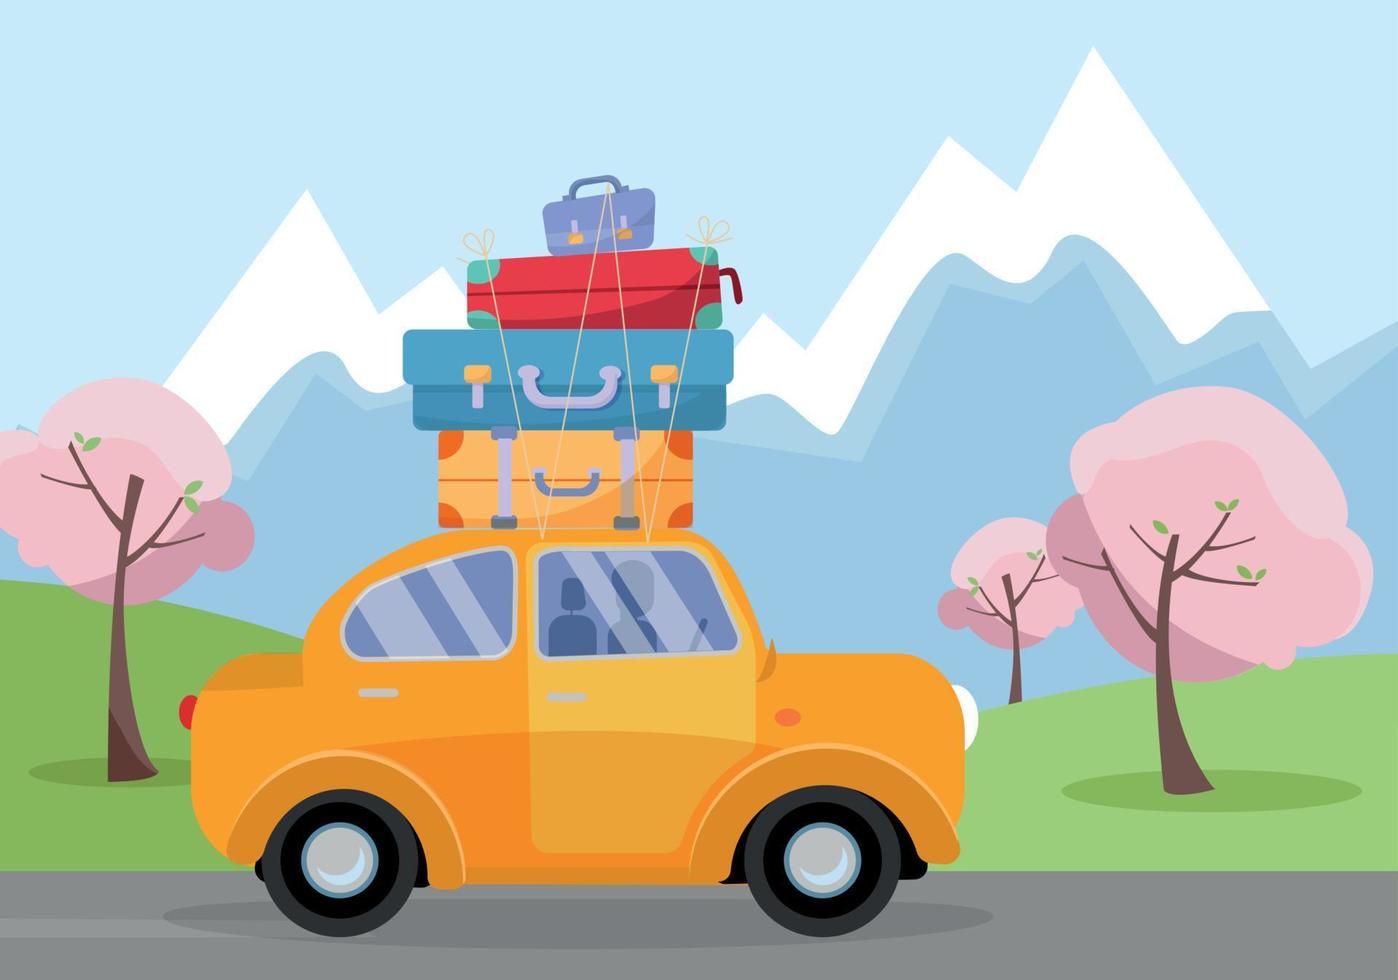 Car on Road Trip. Travel vehicle Concept Tourism and Vacation Together. illustration of spring vacations holiday, blooming trees, world travel with suitcases on car s roof.Touristic retro travel theme vector